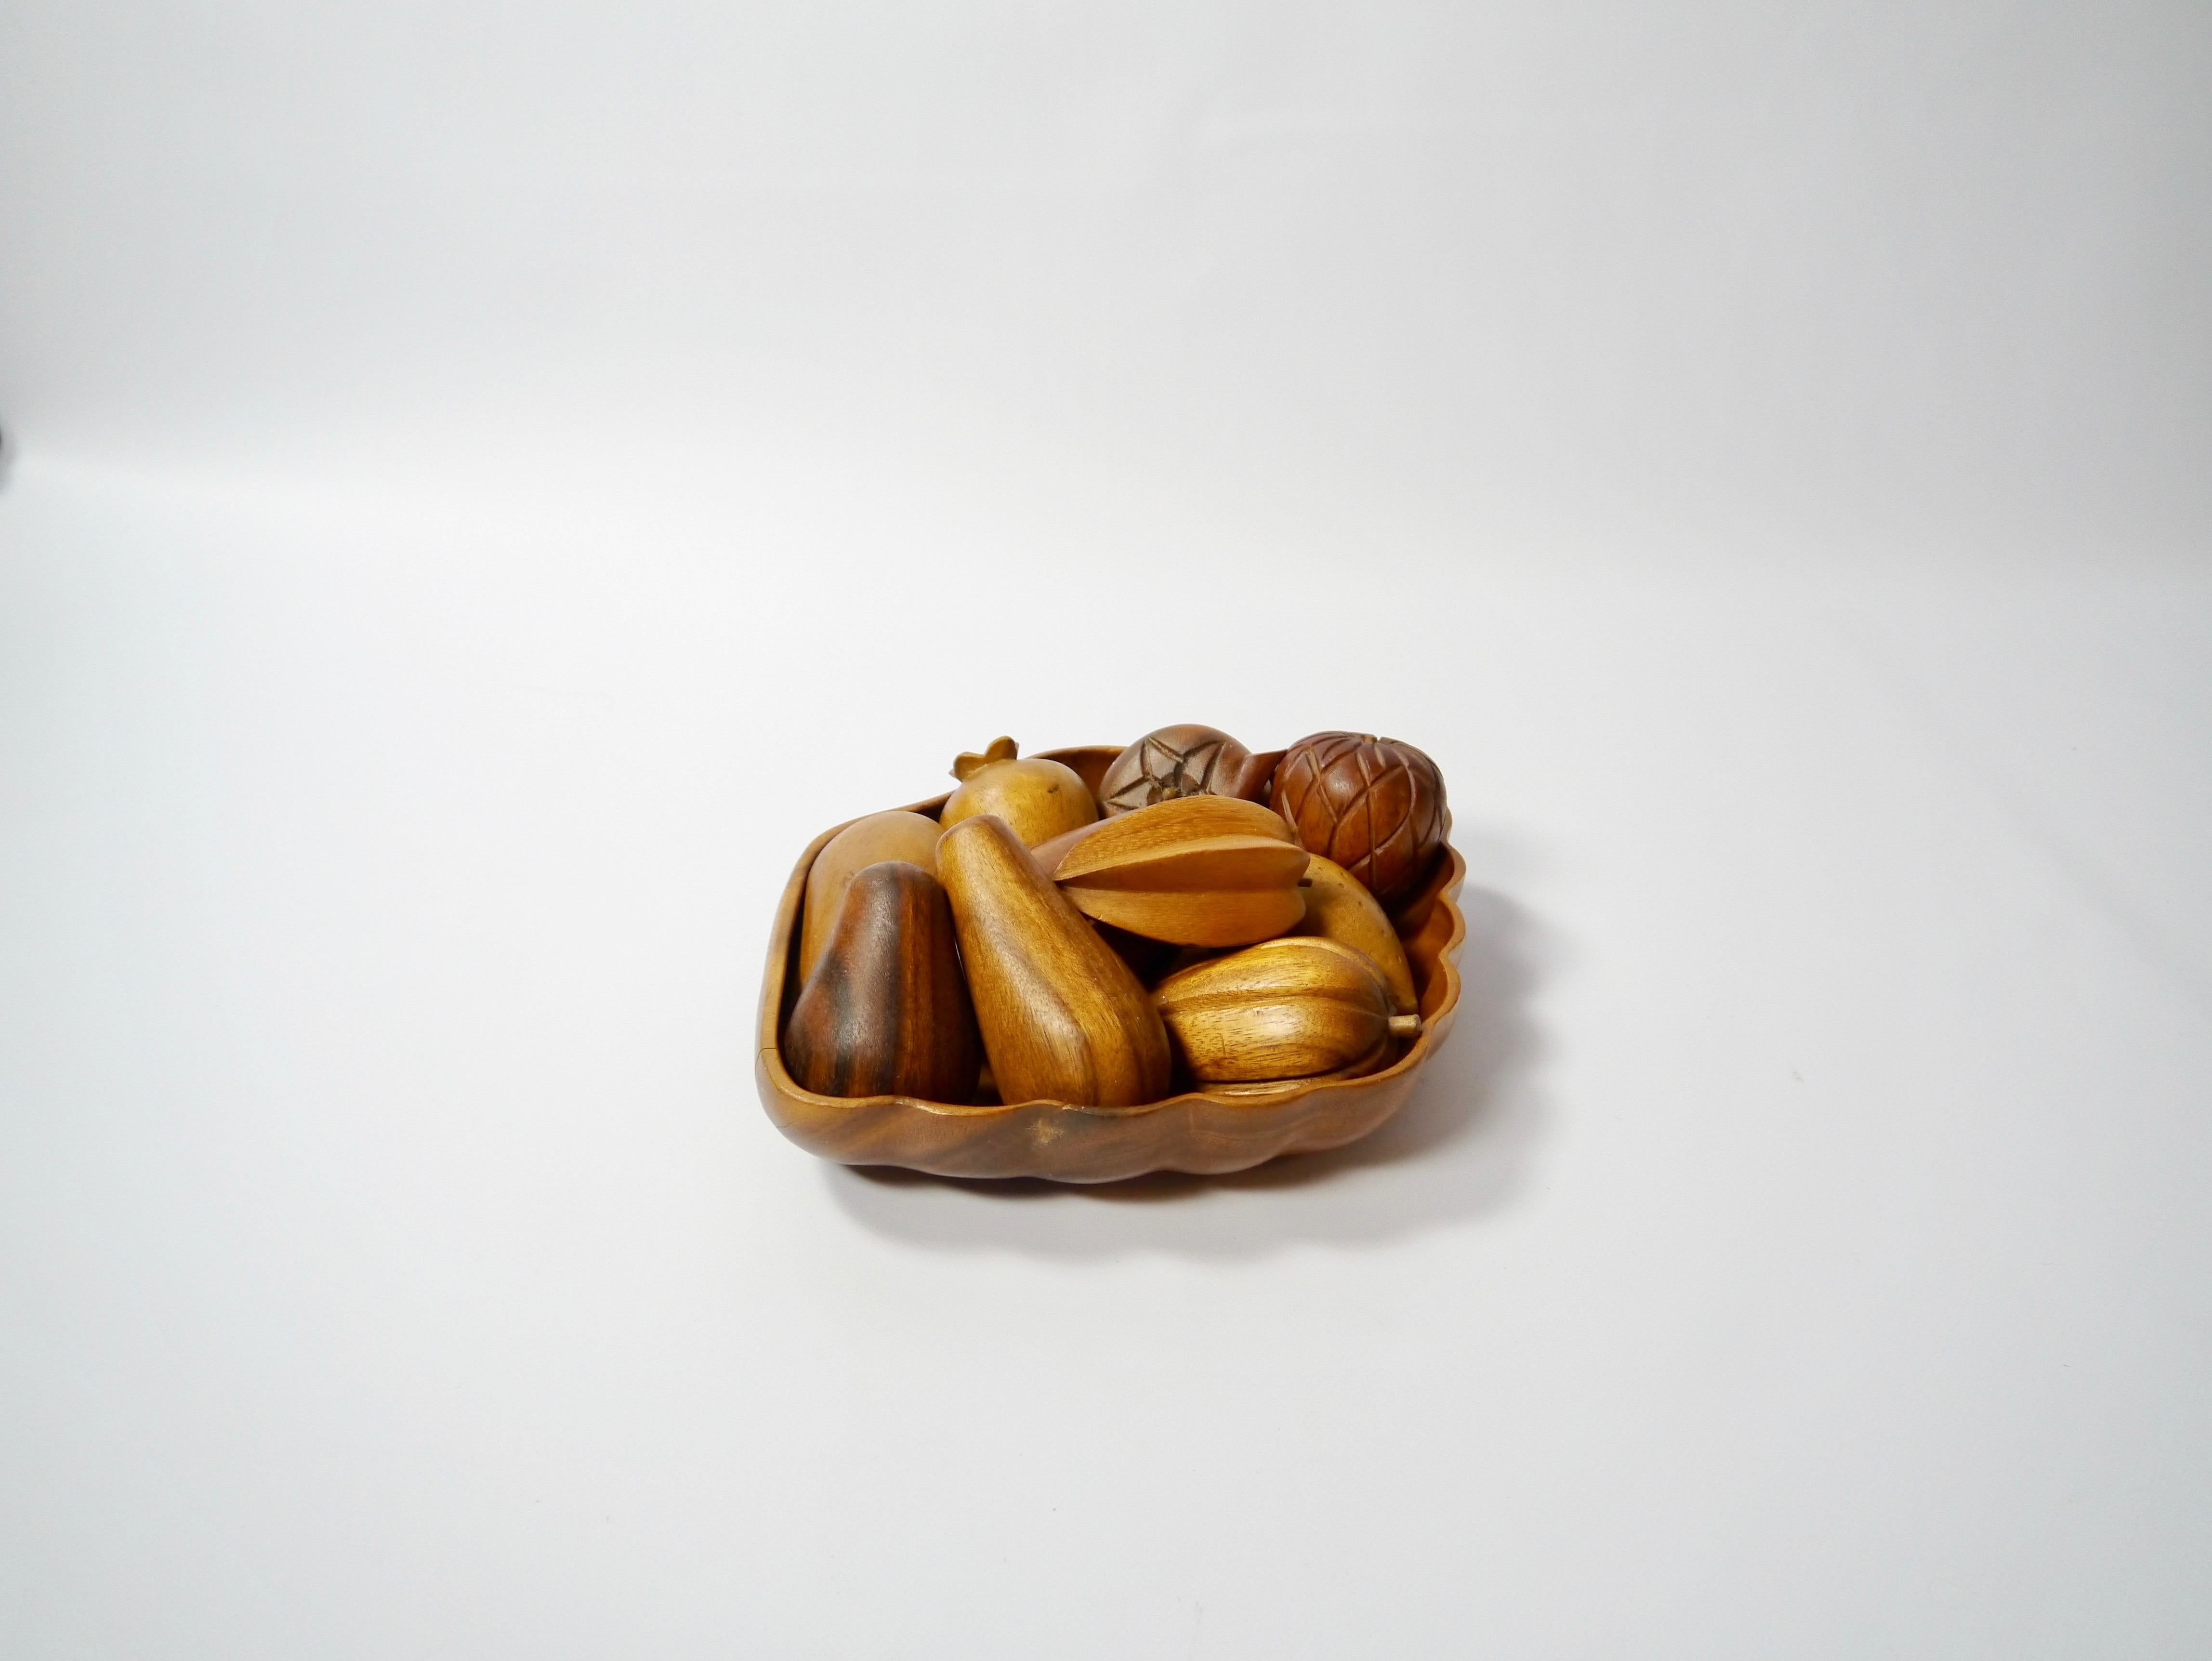 Set of 10 hand carved wooden fruits with bowl. High level of craftsmanship, executed in a handful of different hardwoods.